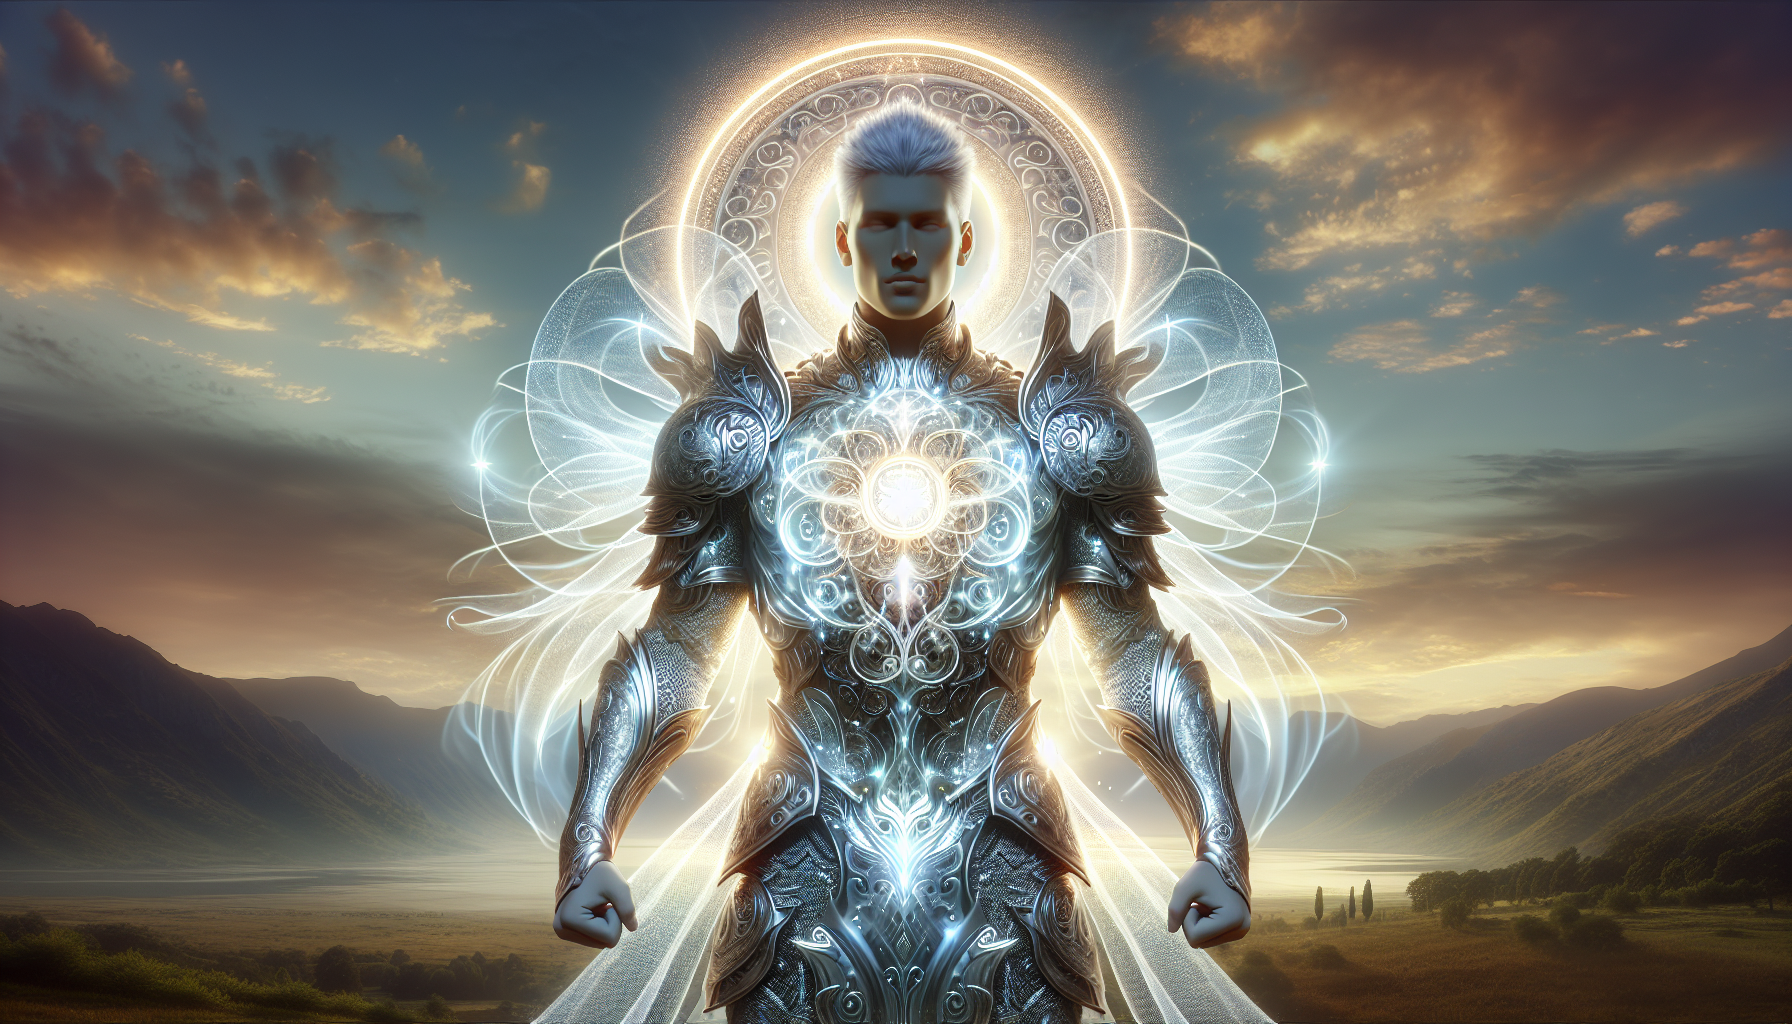 Warrior standing strong with spiritual armor and a radiant light surrounding them